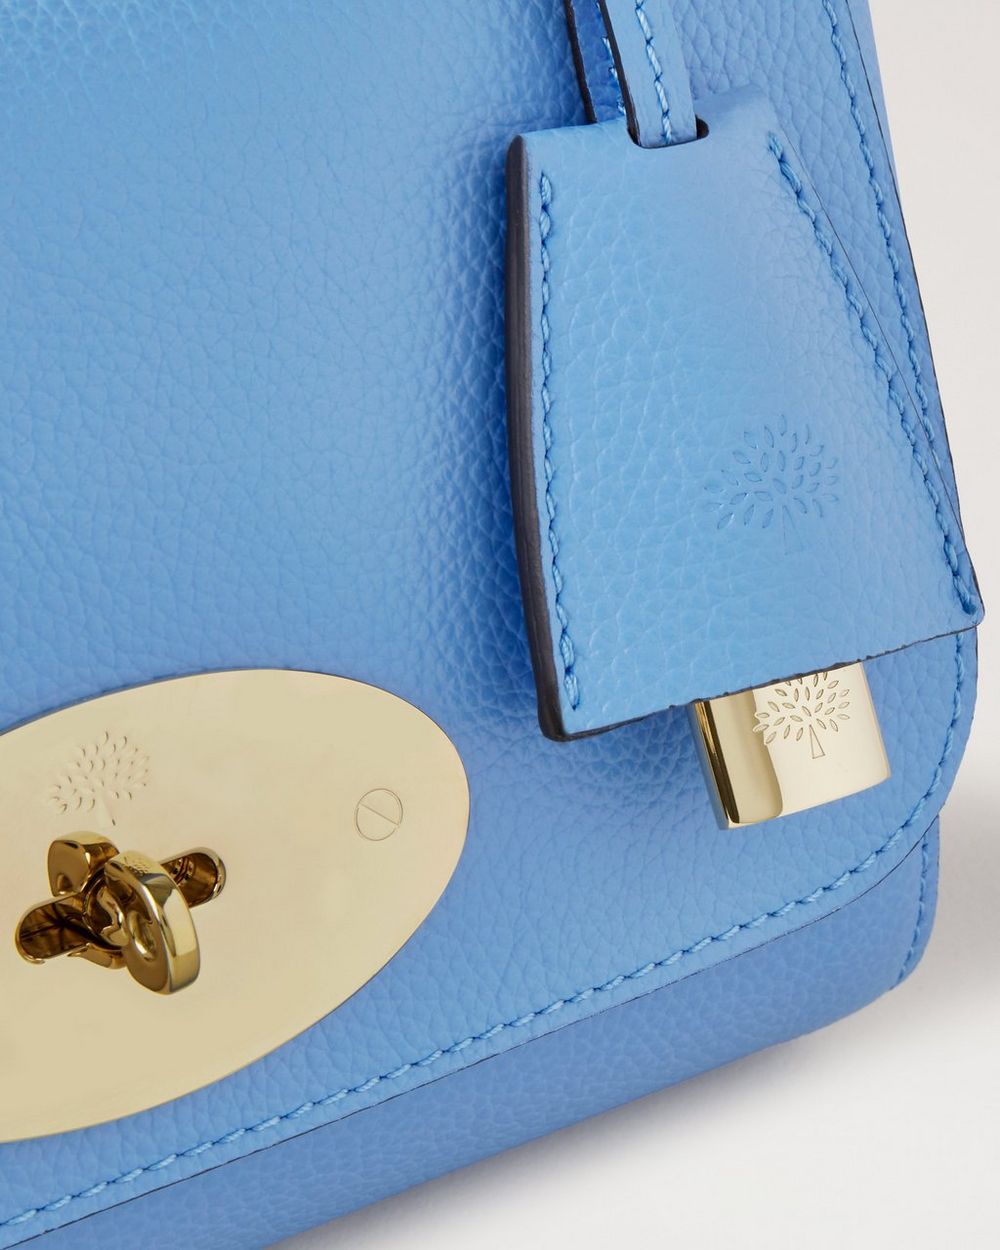 Lily | Cornflower Blue Small Classic Grain | Lily | Mulberry